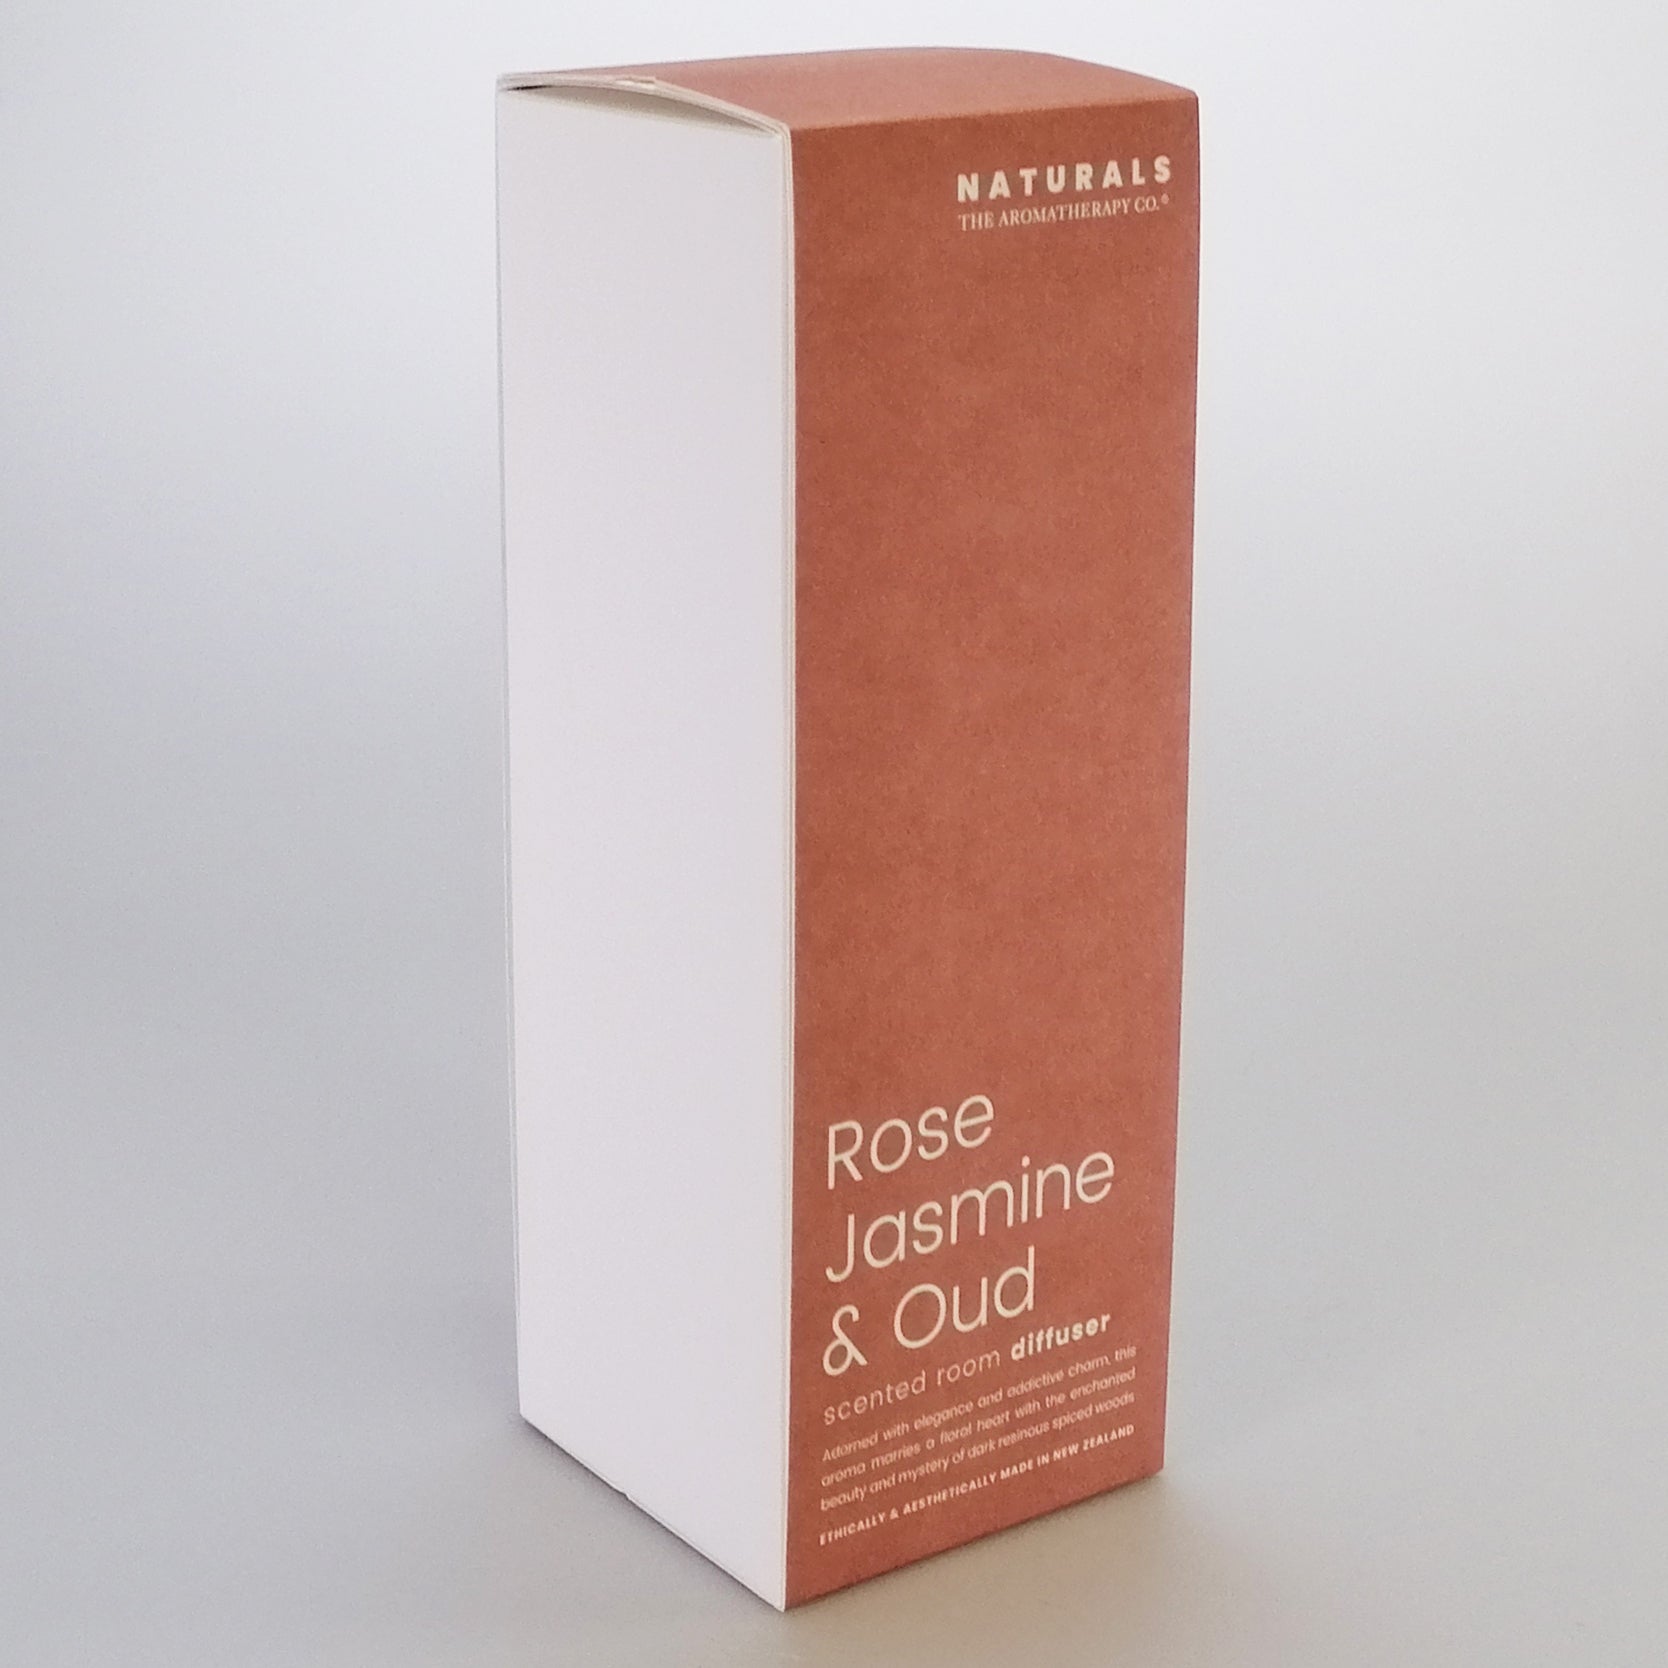 The Aromatherapy Co. Naturals - Rose Jasmine & Oud Diffuser